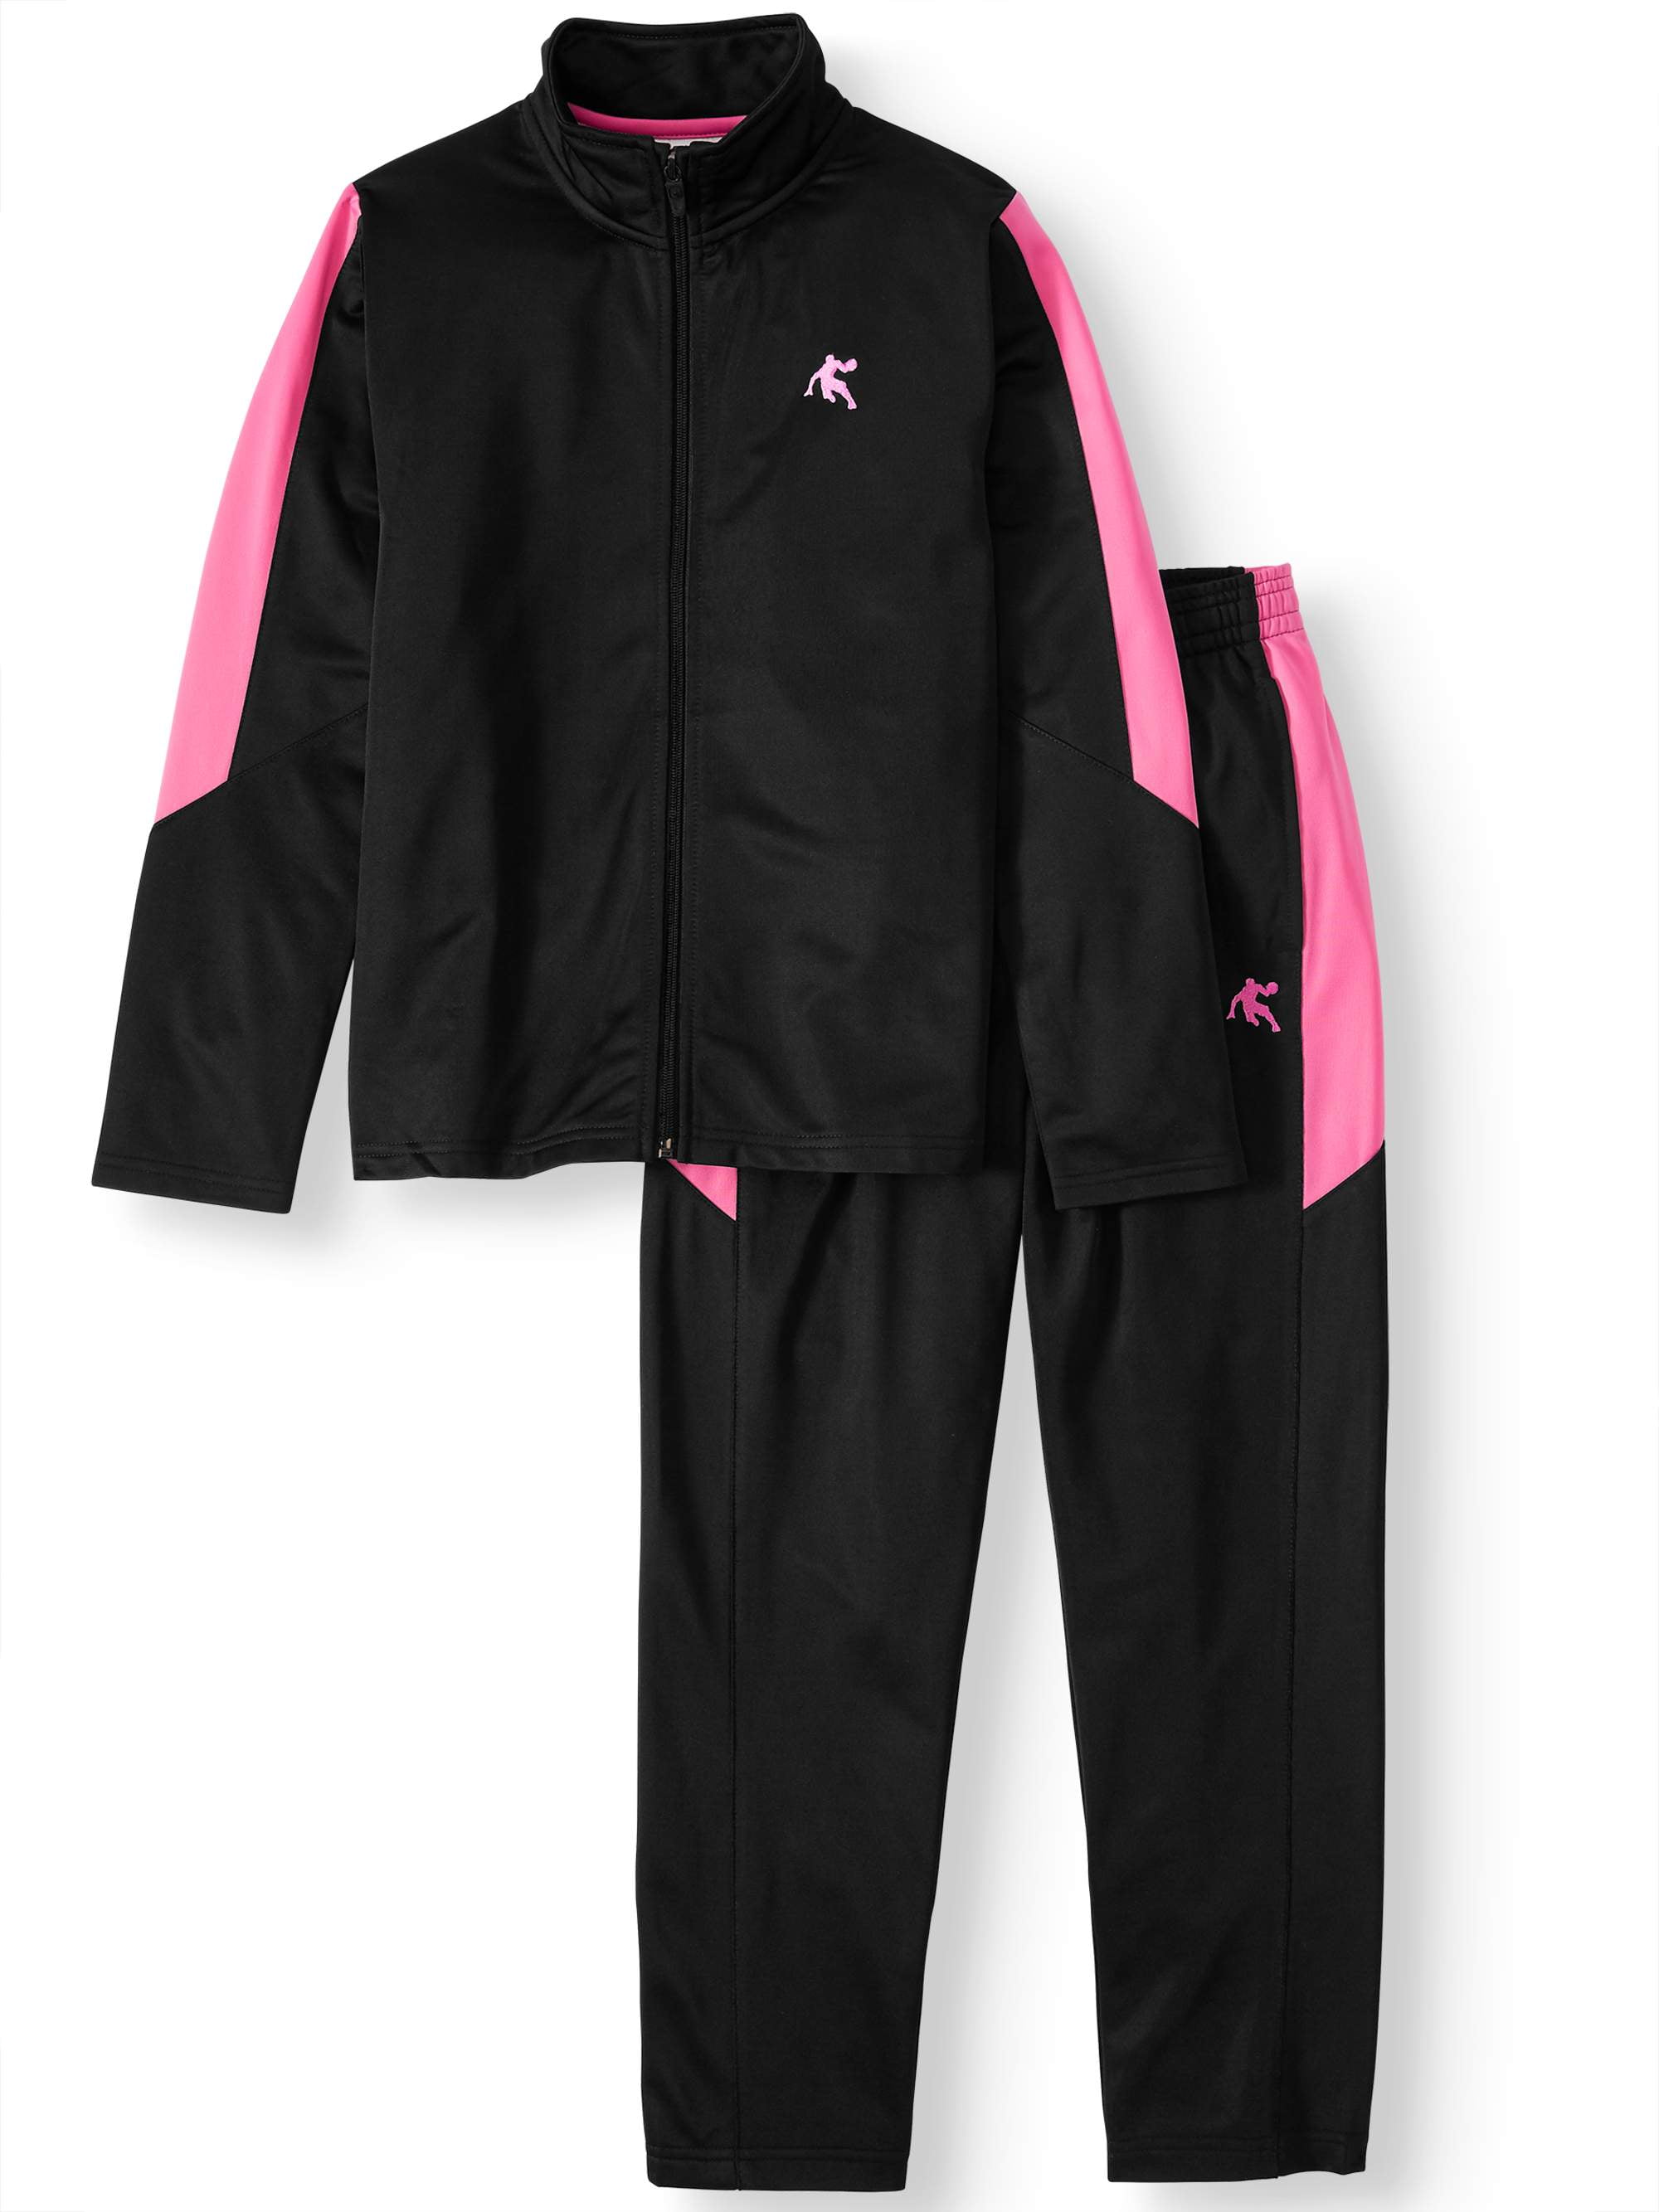 AND1 4-18 Youth Basketball Tracksuit, 2-Piece Athletic Outfit Set ...